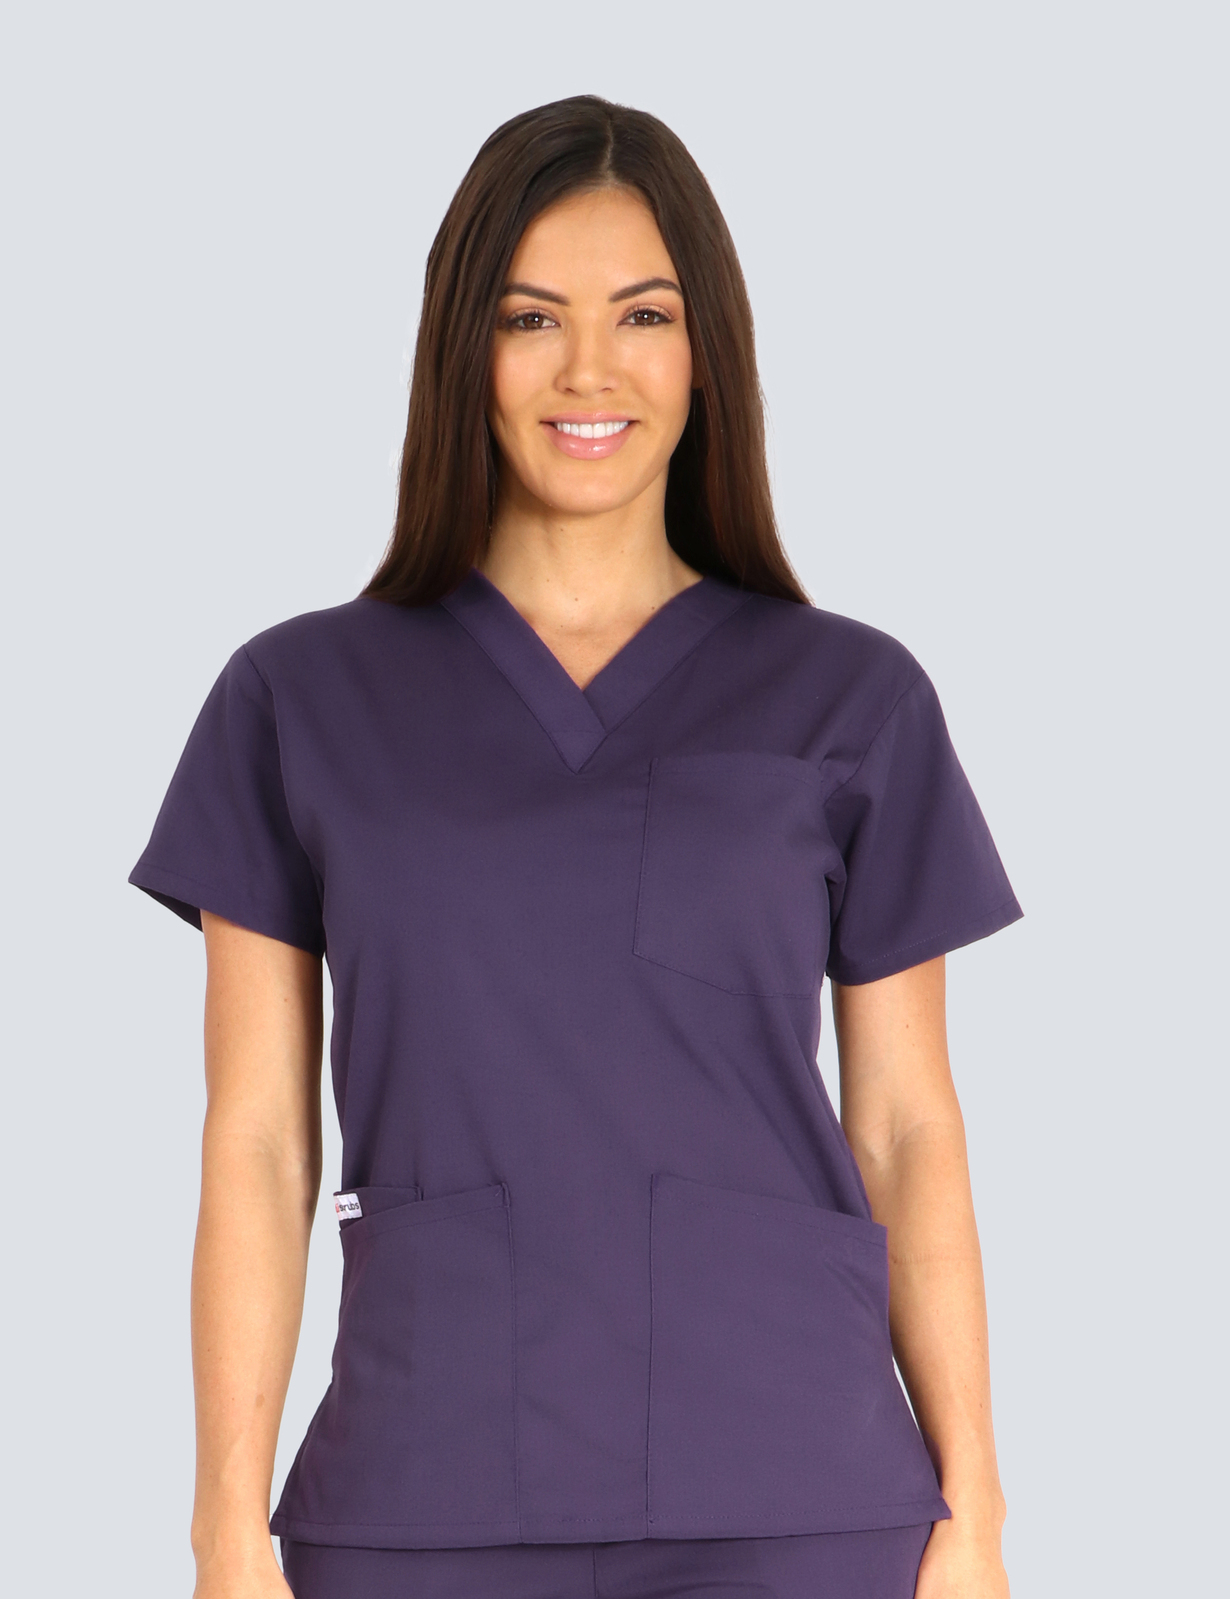 Metro South Oral Health - Therapists (4 Pocket Scrub Top in Aubergine incl Logos)